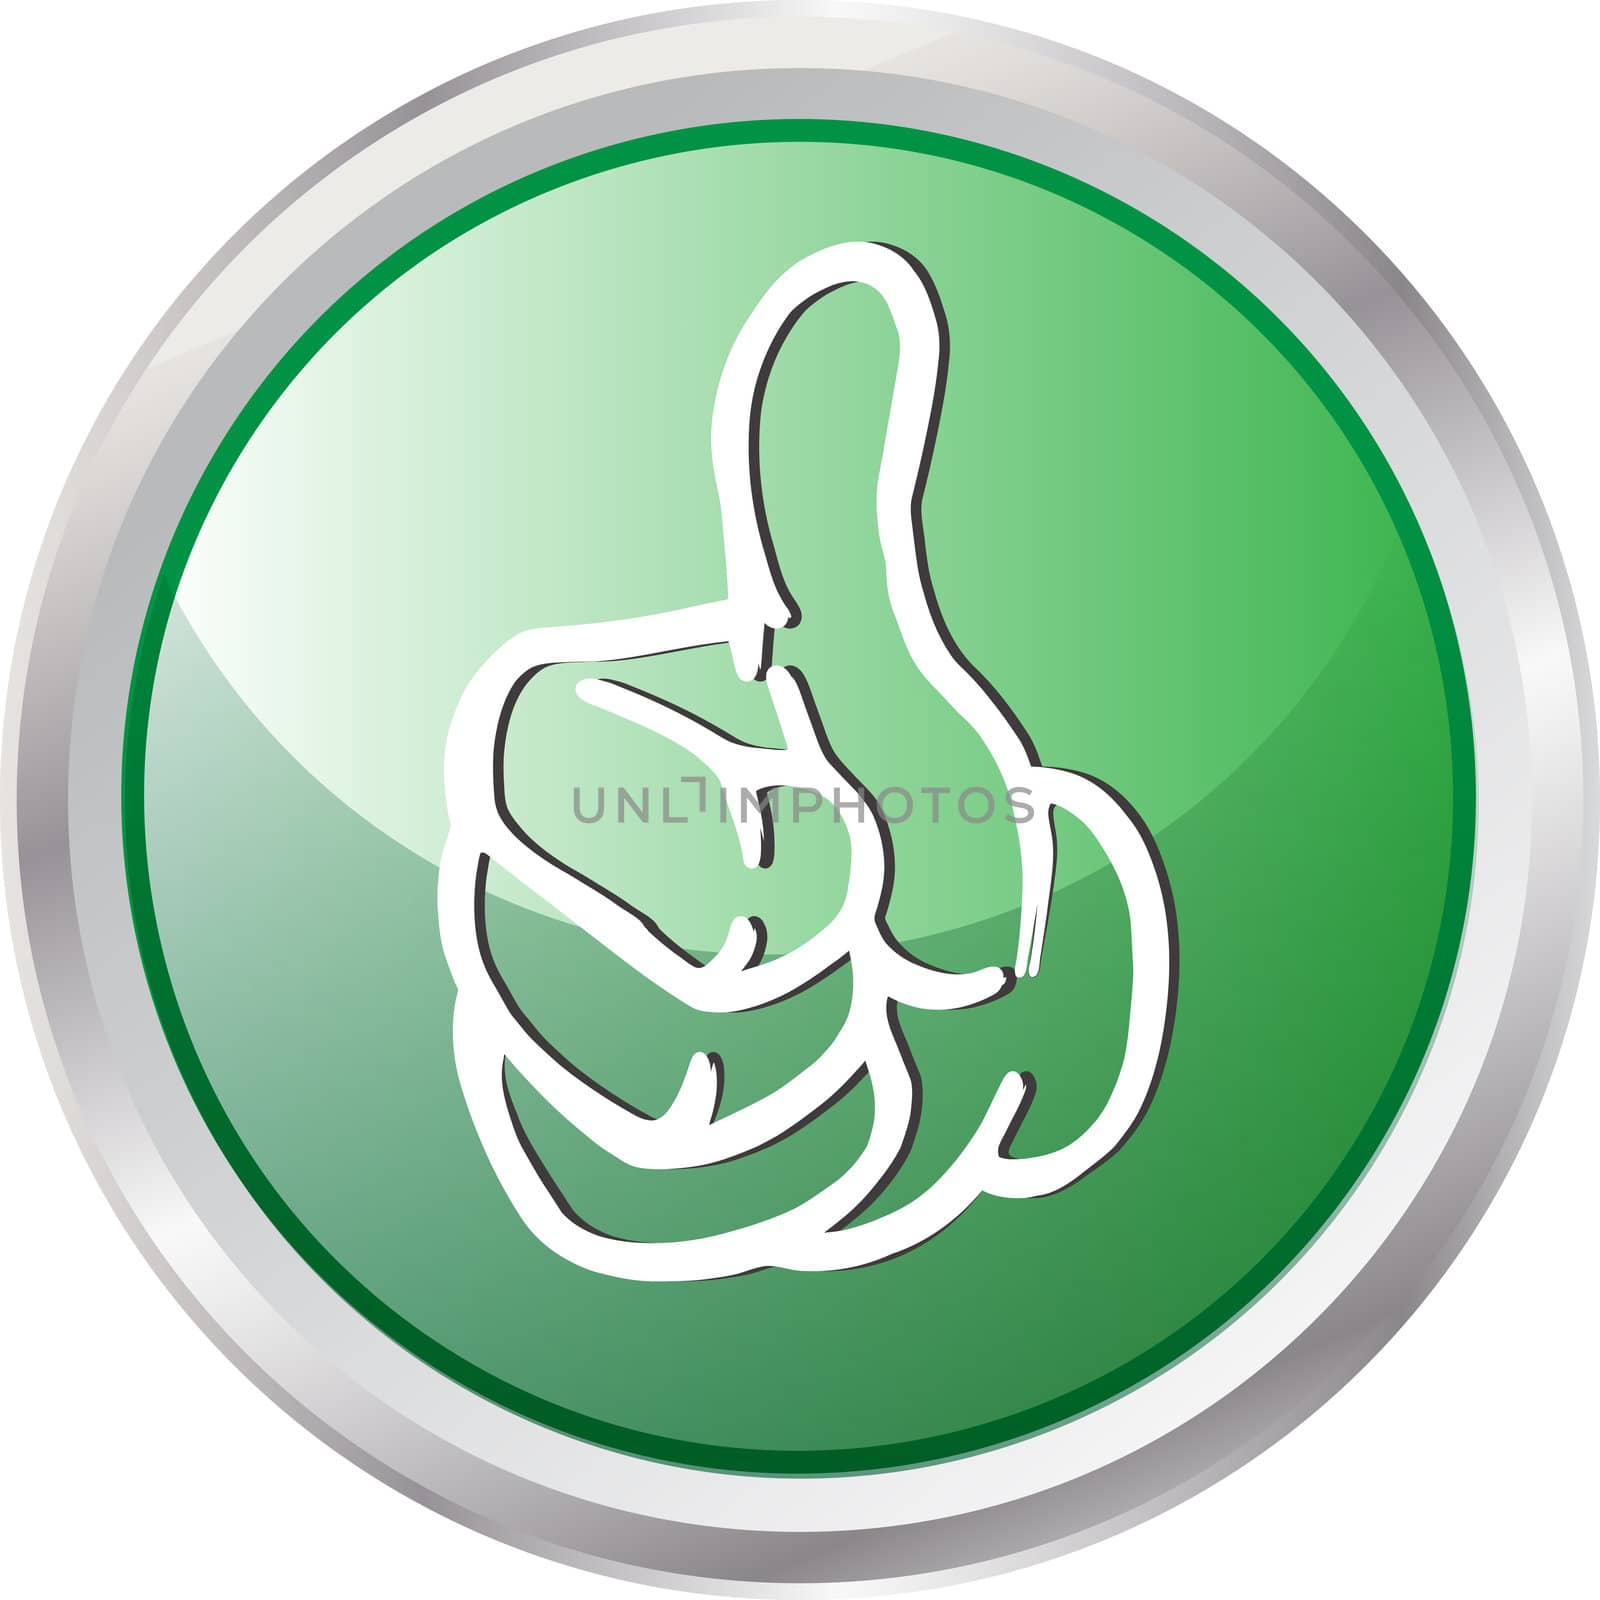 3D button thumb up by peromarketing